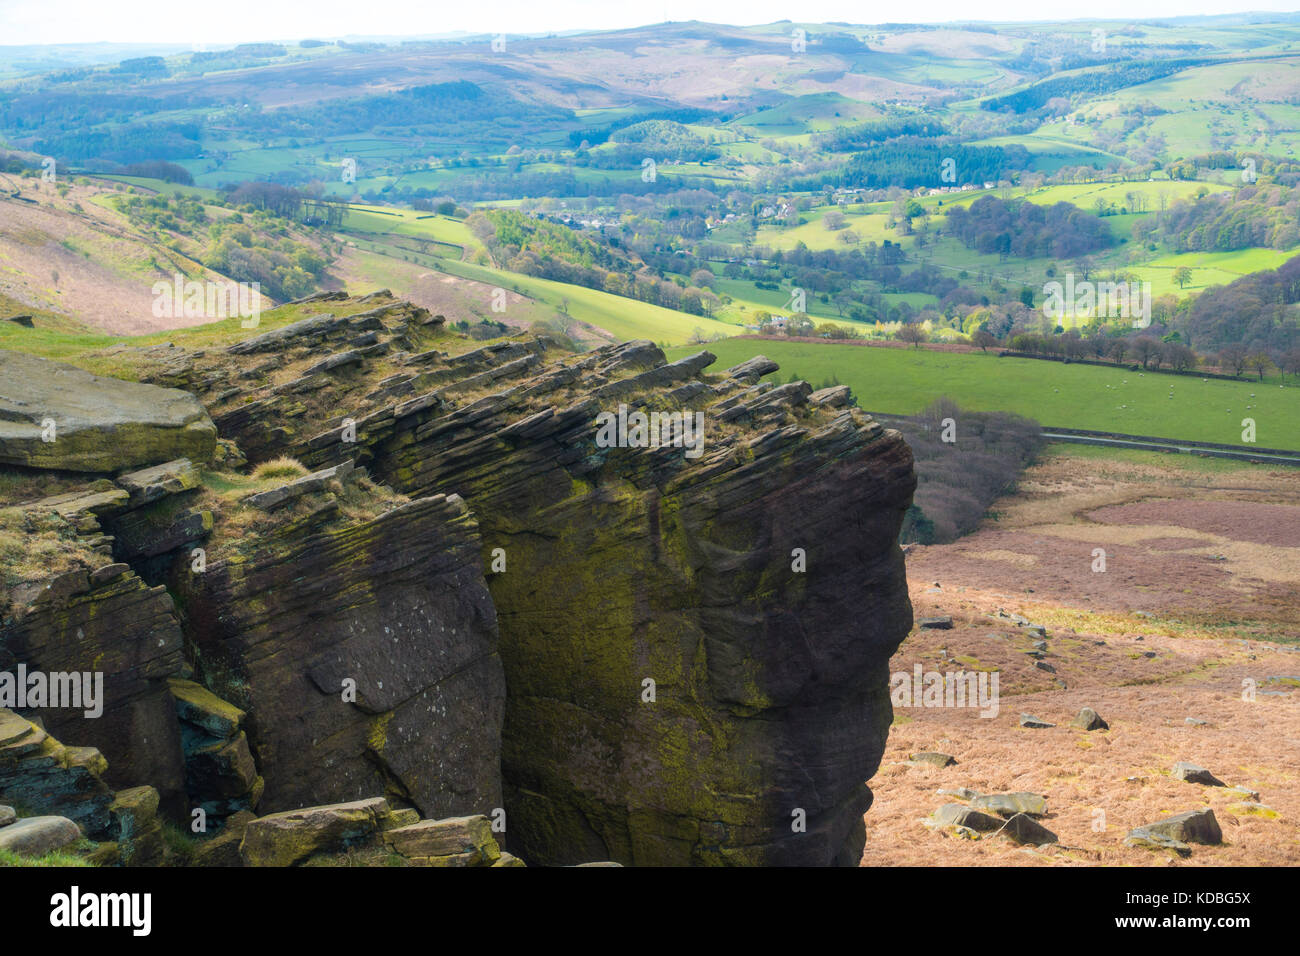 Stanage Edge, Derbyshire, Peak District, England. Gritstone escarpment popular with climbers and walkers Stock Photo